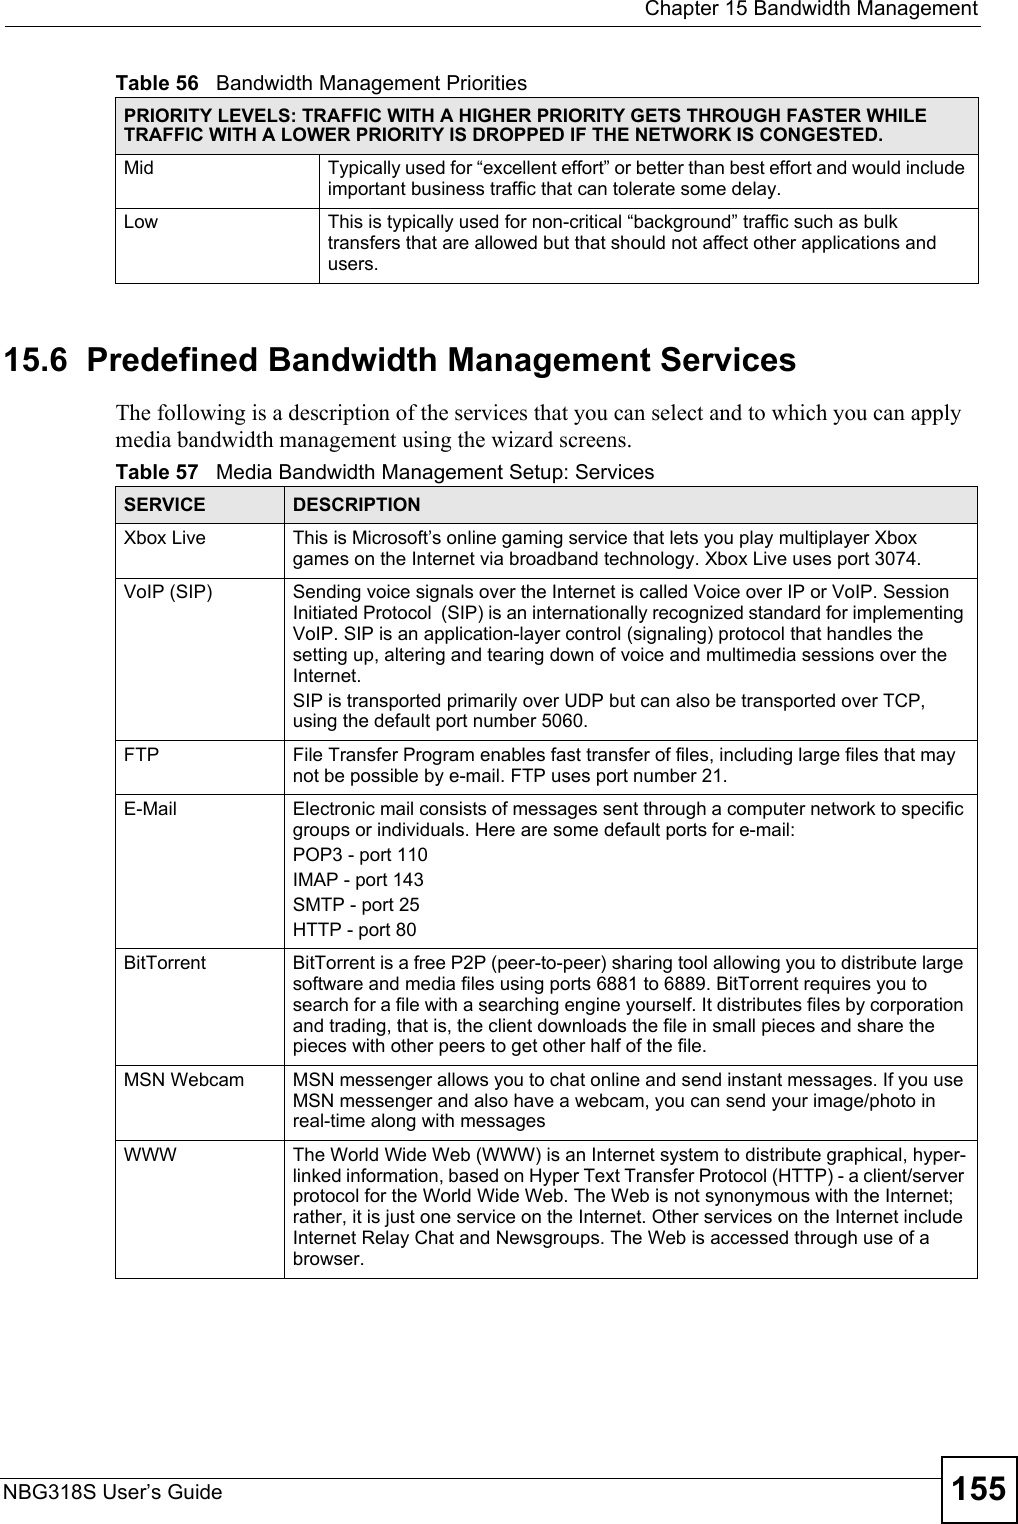  Chapter 15 Bandwidth ManagementNBG318S User’s Guide 15515.6  Predefined Bandwidth Management ServicesThe following is a description of the services that you can select and to which you can apply media bandwidth management using the wizard screens. Mid  Typically used for “excellent effort” or better than best effort and would include important business traffic that can tolerate some delay.Low This is typically used for non-critical “background” traffic such as bulk transfers that are allowed but that should not affect other applications and users. Table 56   Bandwidth Management PrioritiesPRIORITY LEVELS: TRAFFIC WITH A HIGHER PRIORITY GETS THROUGH FASTER WHILE TRAFFIC WITH A LOWER PRIORITY IS DROPPED IF THE NETWORK IS CONGESTED.Table 57   Media Bandwidth Management Setup: ServicesSERVICE DESCRIPTIONXbox Live This is Microsoft’s online gaming service that lets you play multiplayer Xbox games on the Internet via broadband technology. Xbox Live uses port 3074.VoIP (SIP) Sending voice signals over the Internet is called Voice over IP or VoIP. Session Initiated Protocol  (SIP) is an internationally recognized standard for implementing VoIP. SIP is an application-layer control (signaling) protocol that handles the setting up, altering and tearing down of voice and multimedia sessions over the Internet.SIP is transported primarily over UDP but can also be transported over TCP, using the default port number 5060. FTP File Transfer Program enables fast transfer of files, including large files that may not be possible by e-mail. FTP uses port number 21.E-Mail Electronic mail consists of messages sent through a computer network to specific groups or individuals. Here are some default ports for e-mail: POP3 - port 110IMAP - port 143SMTP - port 25HTTP - port 80BitTorrent BitTorrent is a free P2P (peer-to-peer) sharing tool allowing you to distribute large software and media files using ports 6881 to 6889. BitTorrent requires you to search for a file with a searching engine yourself. It distributes files by corporation and trading, that is, the client downloads the file in small pieces and share the pieces with other peers to get other half of the file.MSN Webcam MSN messenger allows you to chat online and send instant messages. If you use MSN messenger and also have a webcam, you can send your image/photo in real-time along with messagesWWW The World Wide Web (WWW) is an Internet system to distribute graphical, hyper-linked information, based on Hyper Text Transfer Protocol (HTTP) - a client/server protocol for the World Wide Web. The Web is not synonymous with the Internet; rather, it is just one service on the Internet. Other services on the Internet include Internet Relay Chat and Newsgroups. The Web is accessed through use of a browser.